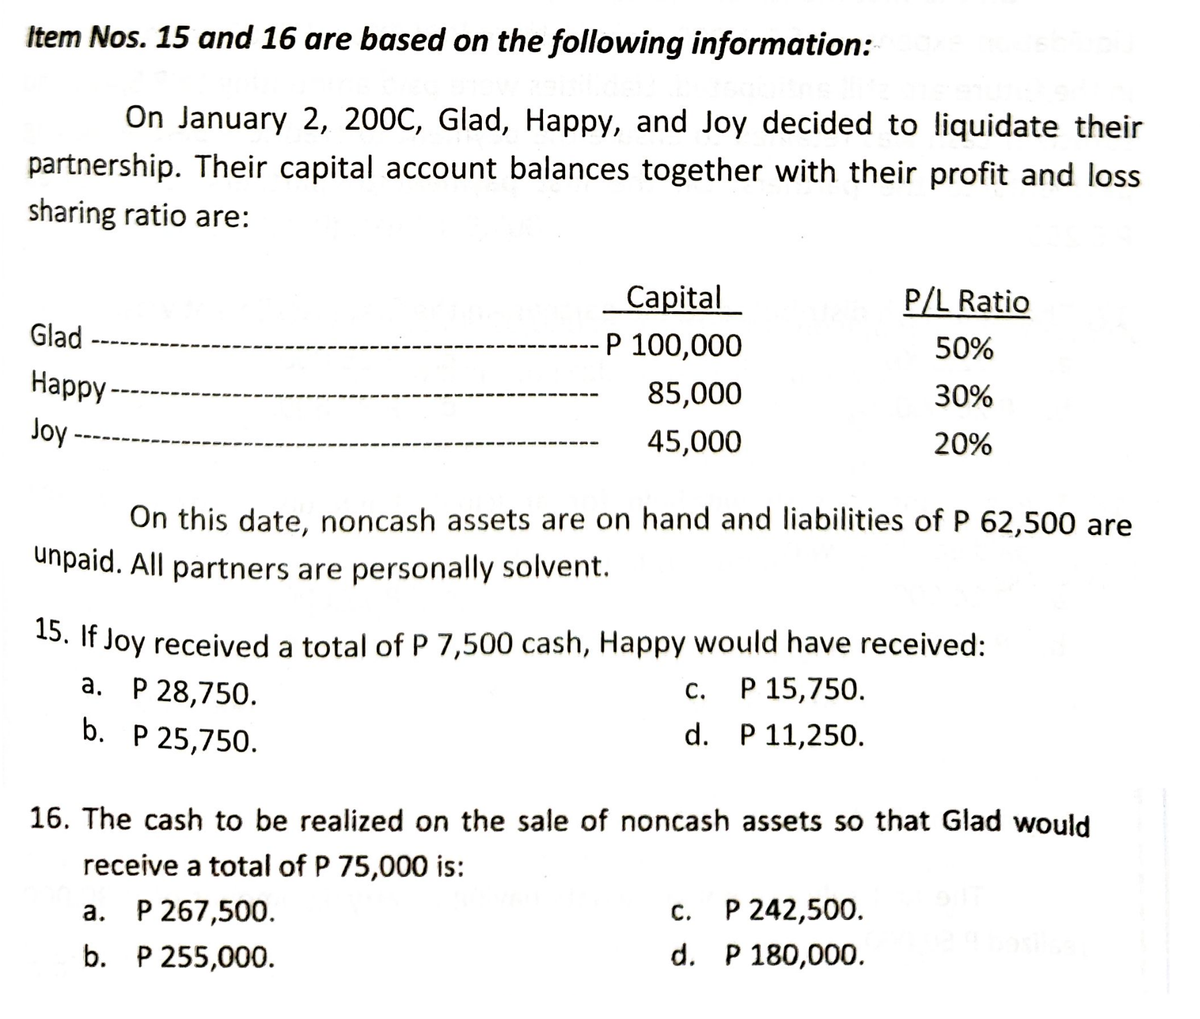 Item Nos. 15 and 16 are based on the following information:
On January 2, 200C, Glad, Happy, and Joy decided to liquidate their
partnership. Their capital account balances together with their profit and loss
sharing ratio are:
P/L Ratio
Capital
P 100,000
Glad
50%
Happy
85,000
30%
Joy
45,000
20%
On this date, noncash assets are on hand and liabilities of P 62,500 are
unpaid. All partners are personally solvent.
15. If Joy received a total of P 7,500 cash, Happy would have received:
a. P 28,750.
C.
P 15,750.
b. P 25,750.
d.
P 11,250.
16. The cash to be realized on the sale of noncash assets so that Glad would
receive a total of P 75,000 is:
a. P 267,500.
C.
P 242,500.
d. P 180,000.
b. P 255,000.